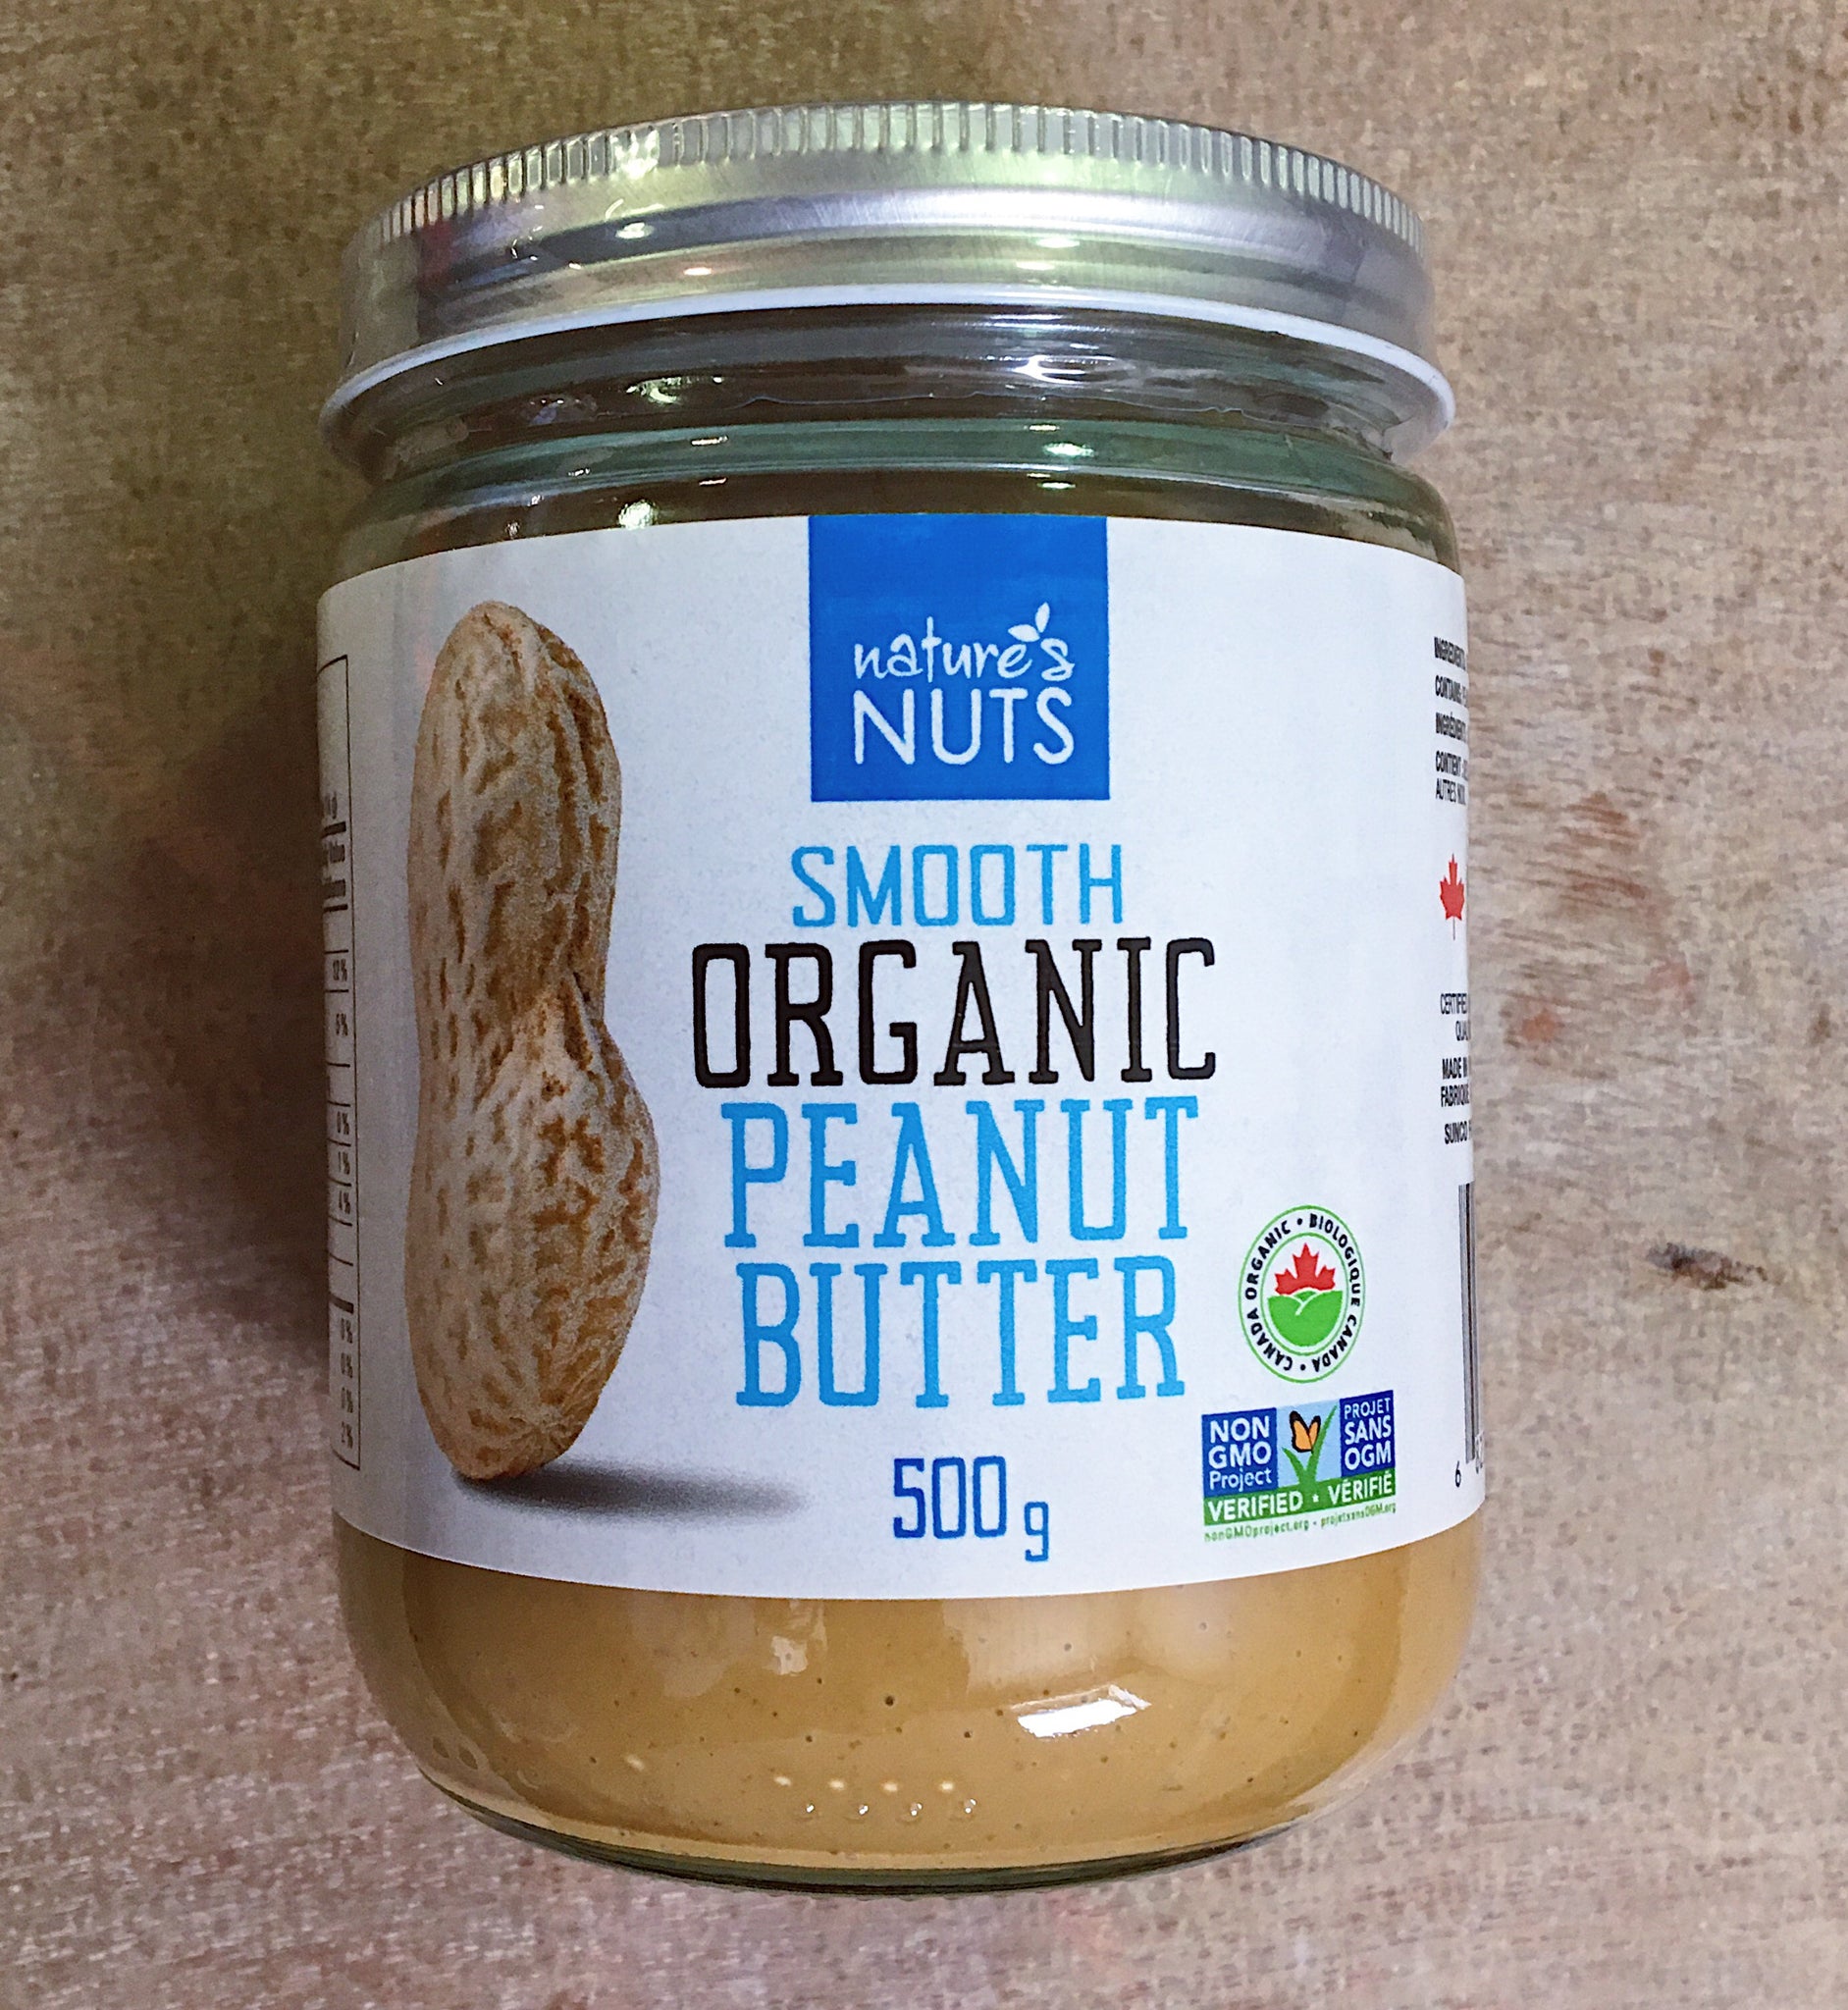 Nuts to You Organic Peanut Butter, Smooth - 500 g